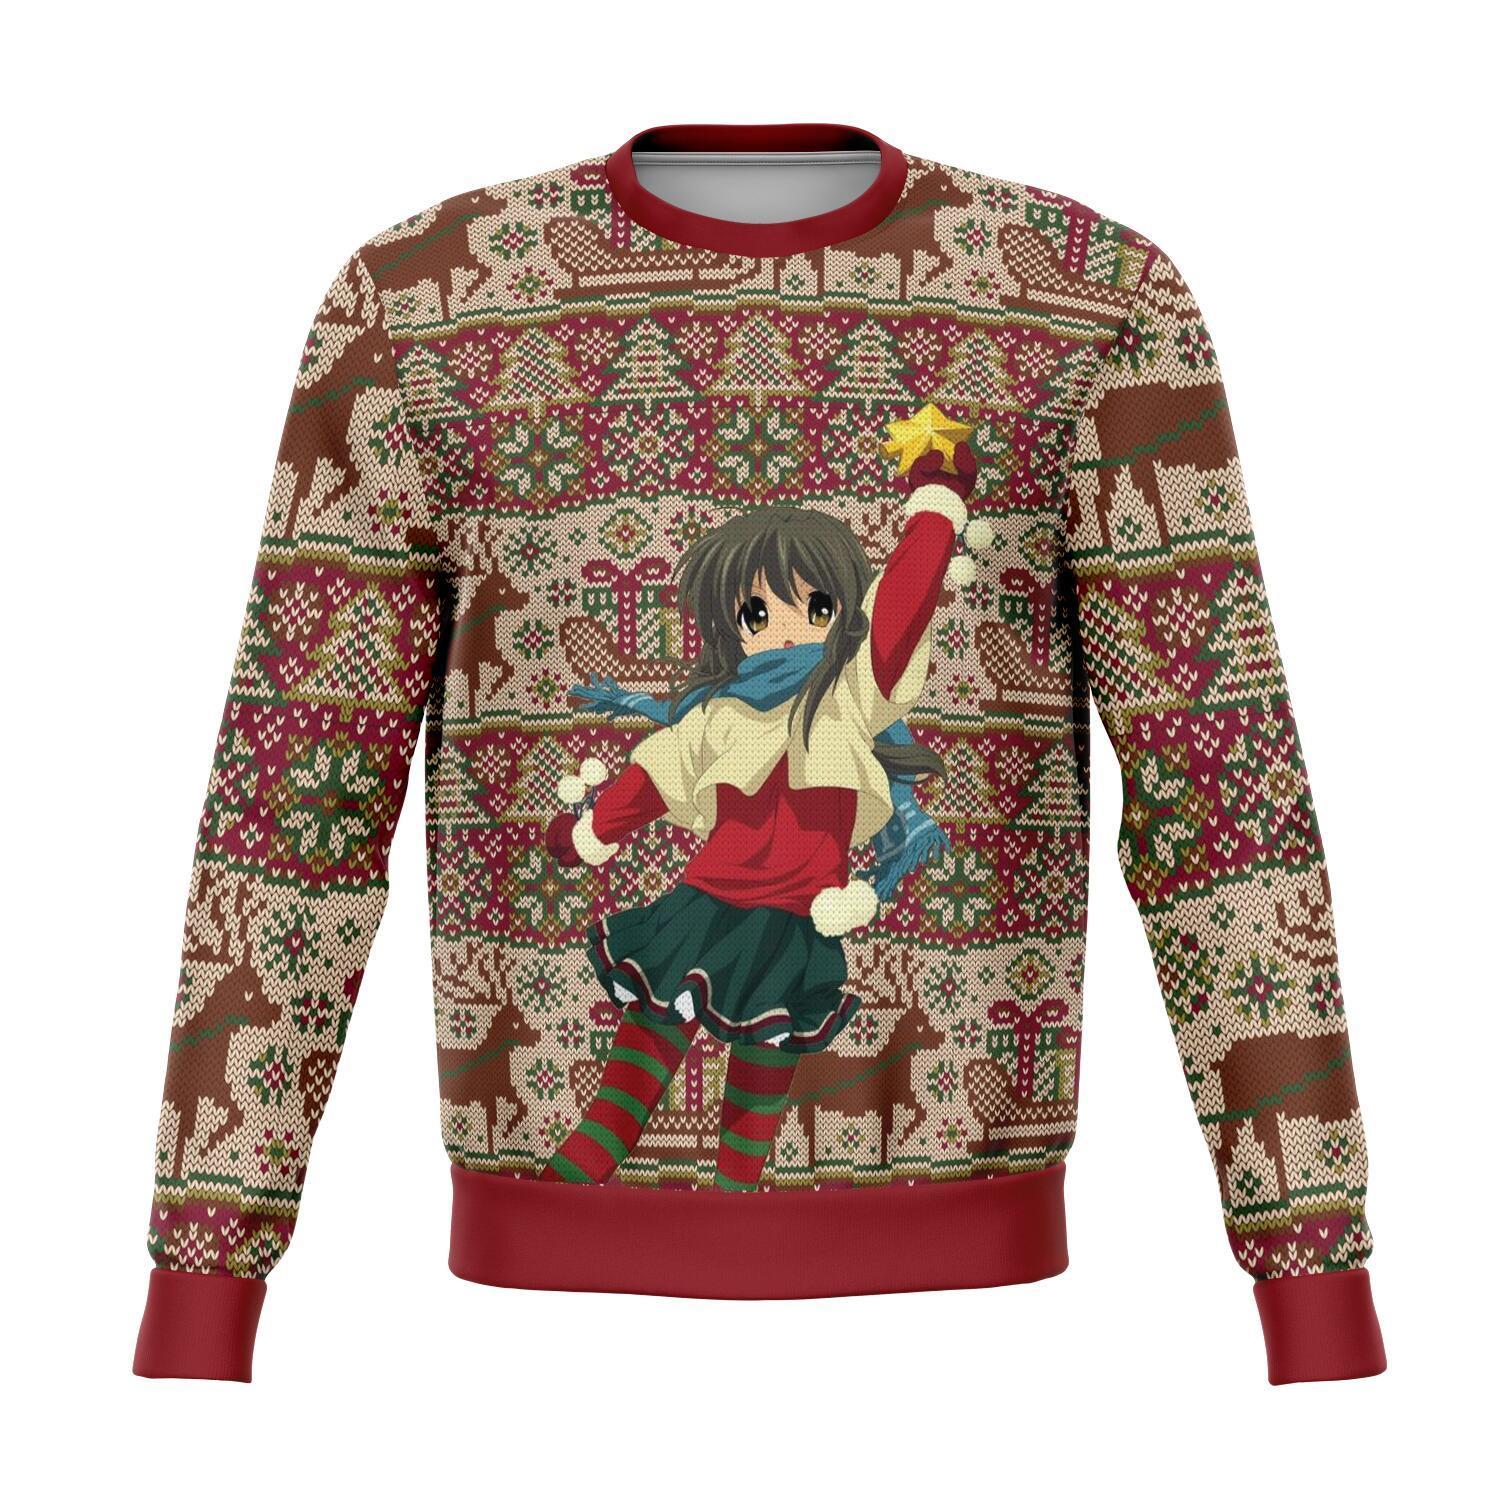 Clannad Premium Ugly Christmas Sweater Amazing Gift Idea Thanksgiving Gift